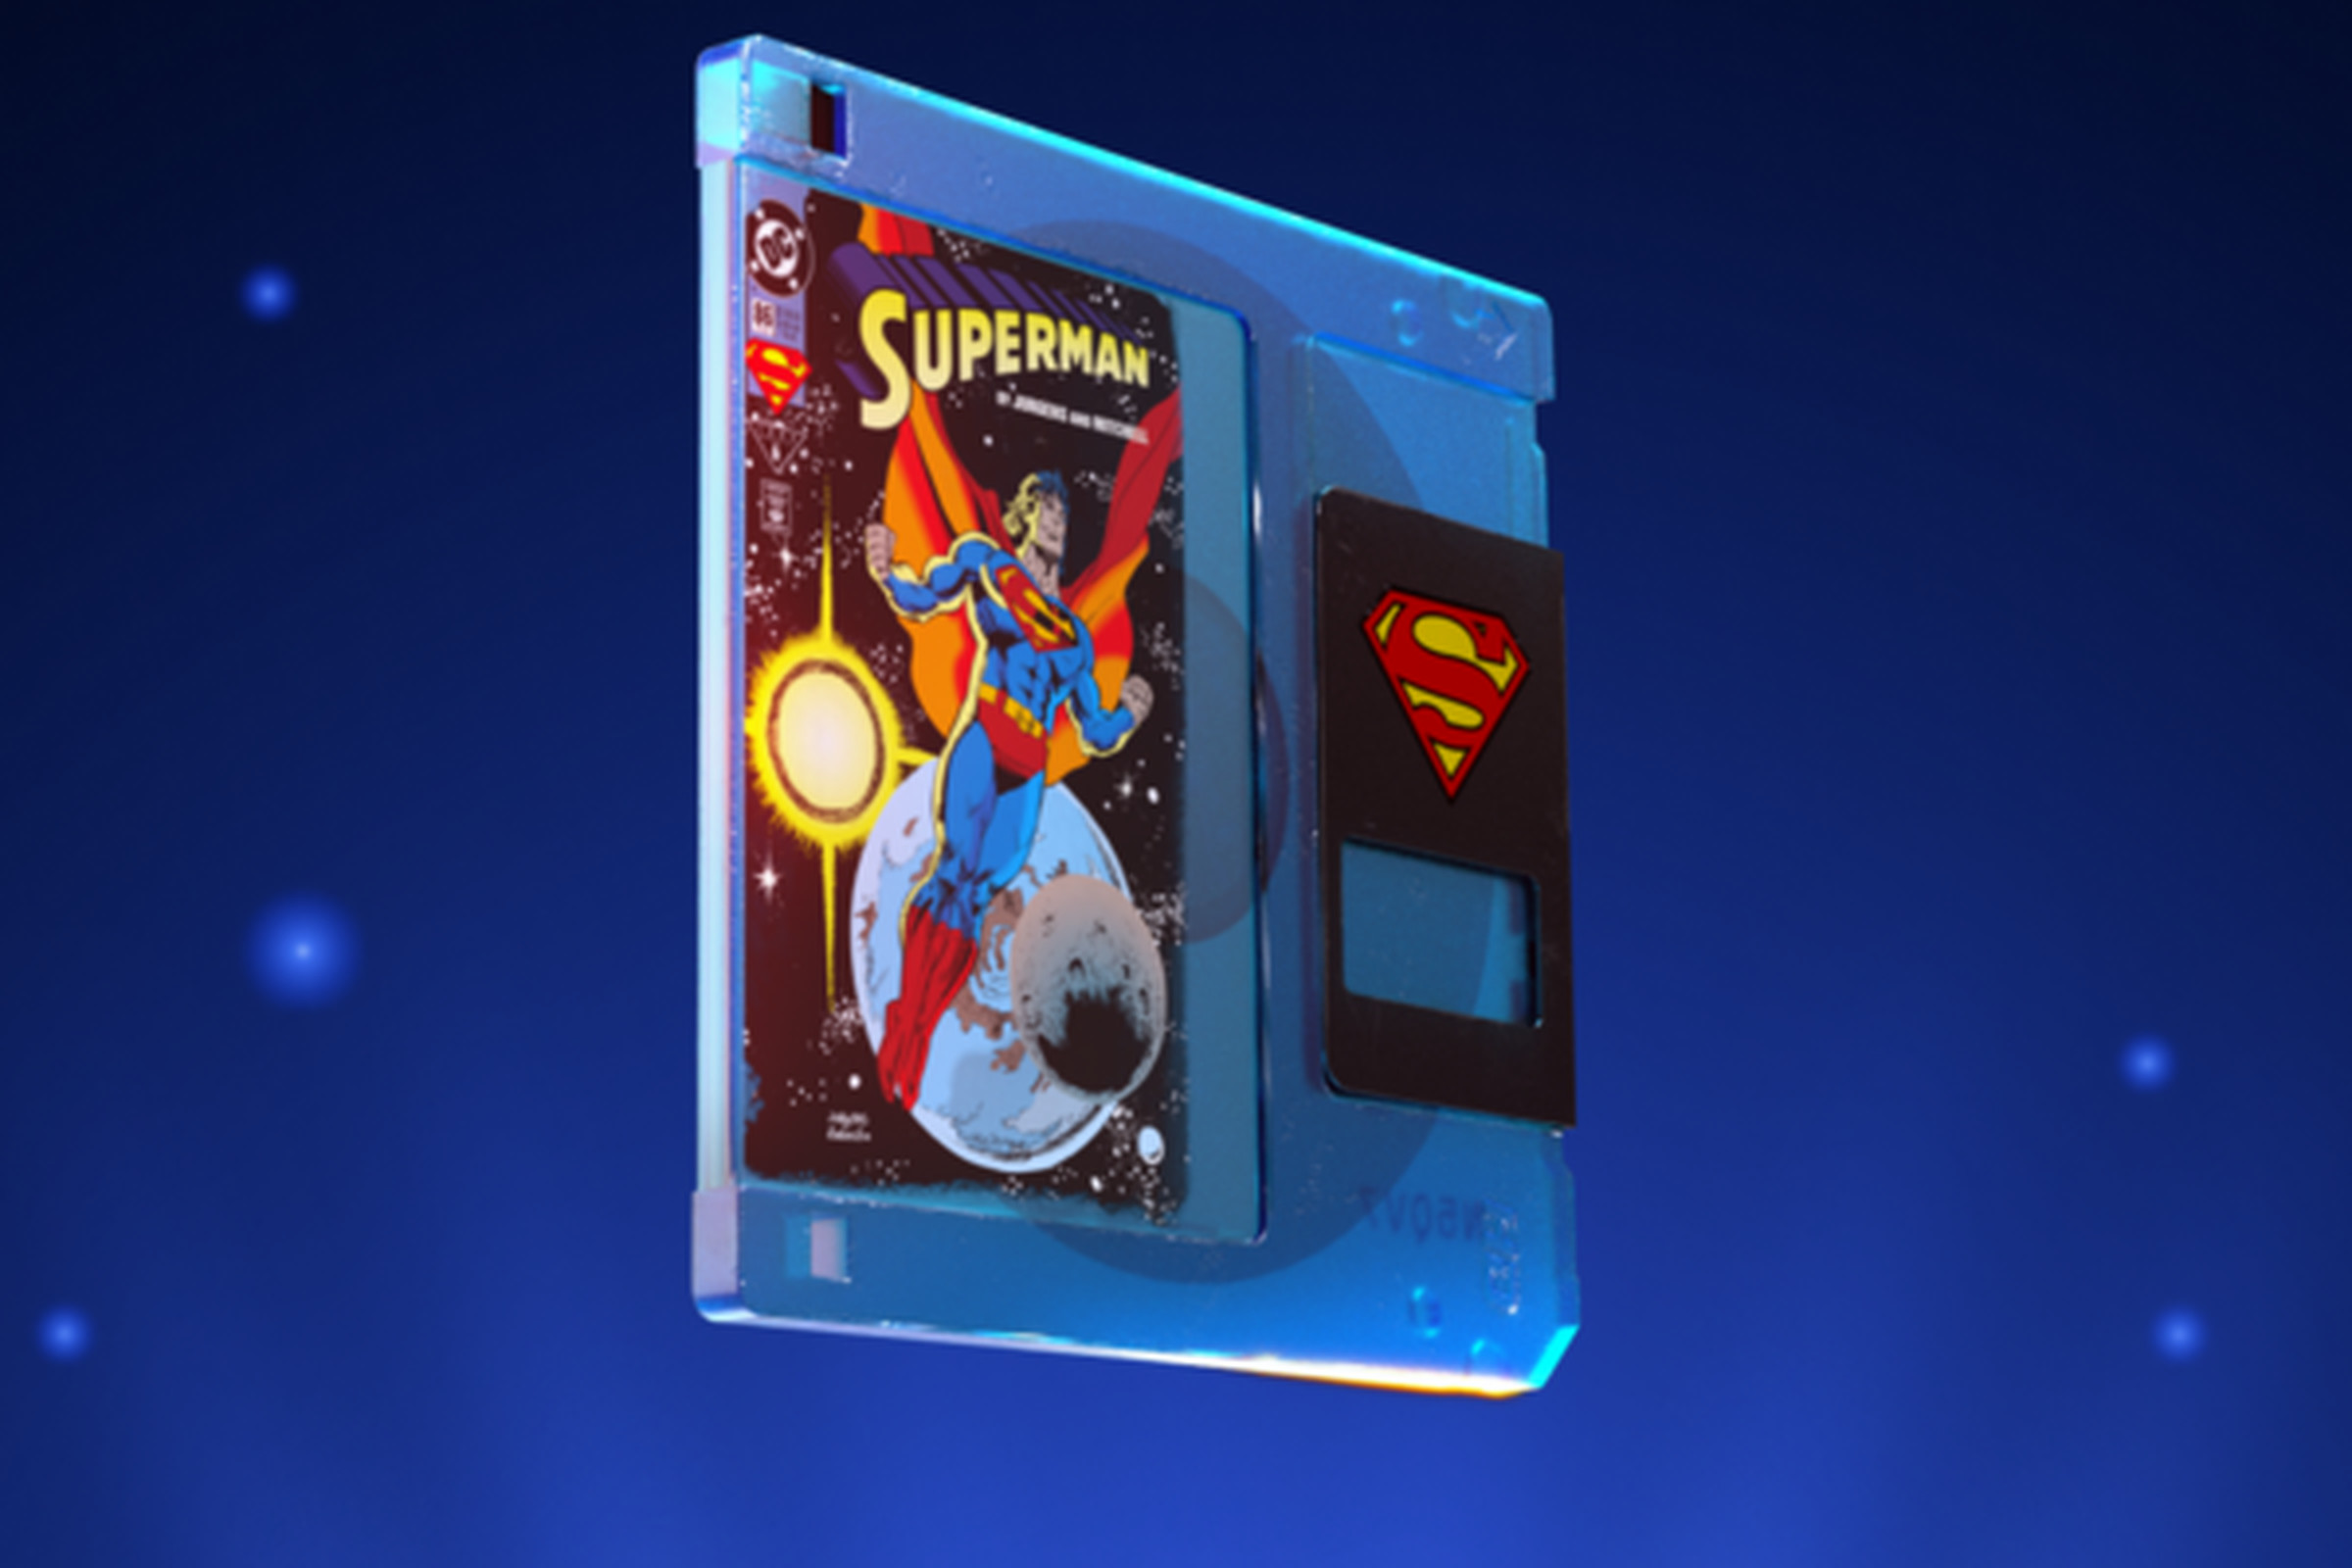 A Superman cover that may be among the NFTs available from DC